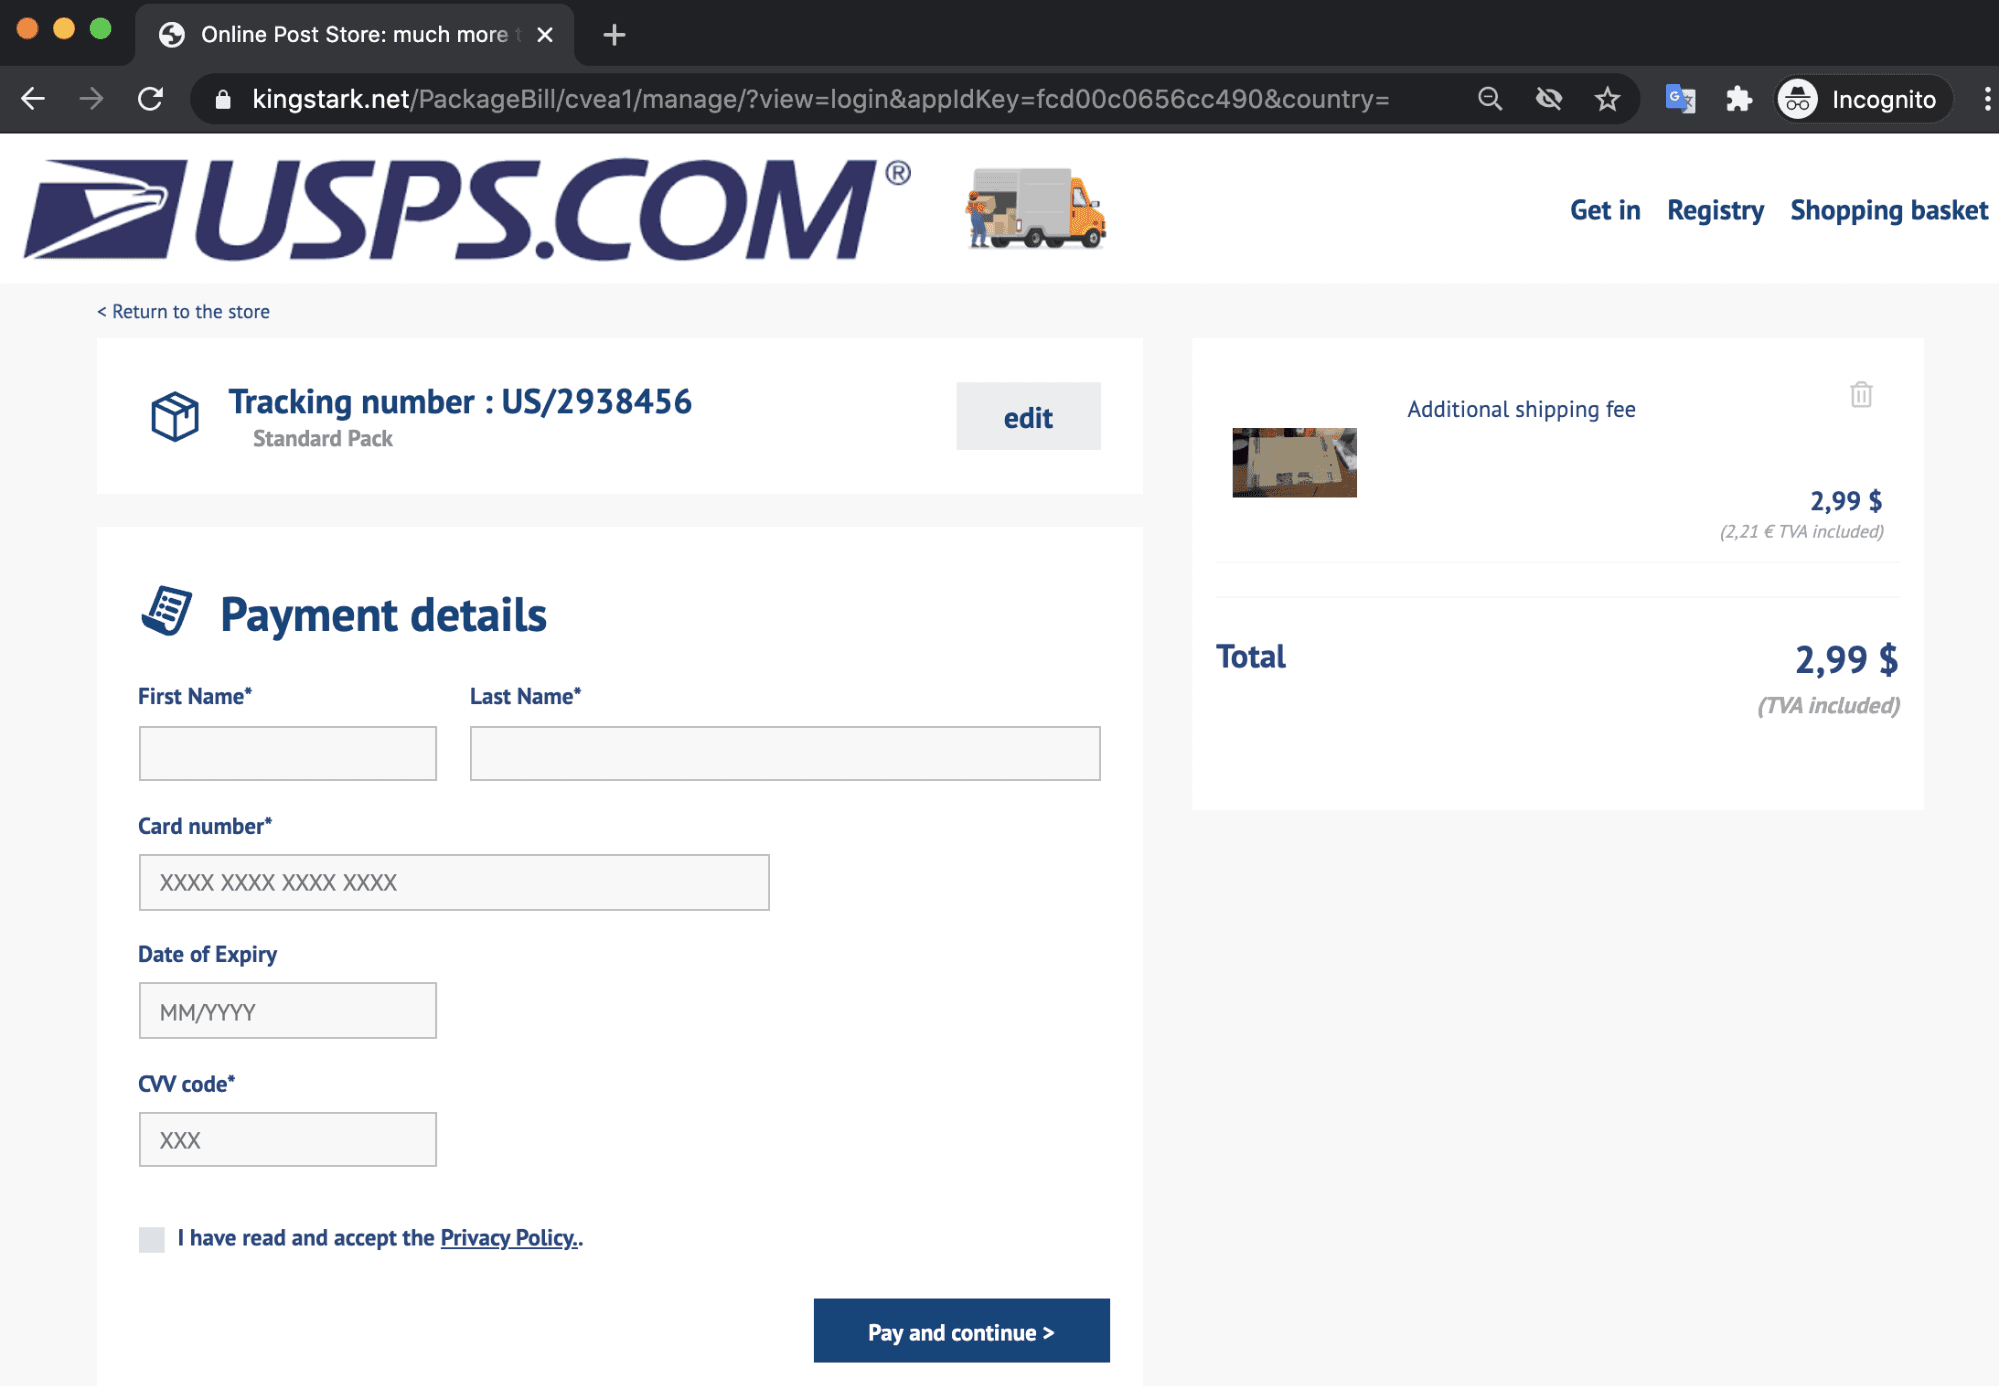 USPS phishing payment site